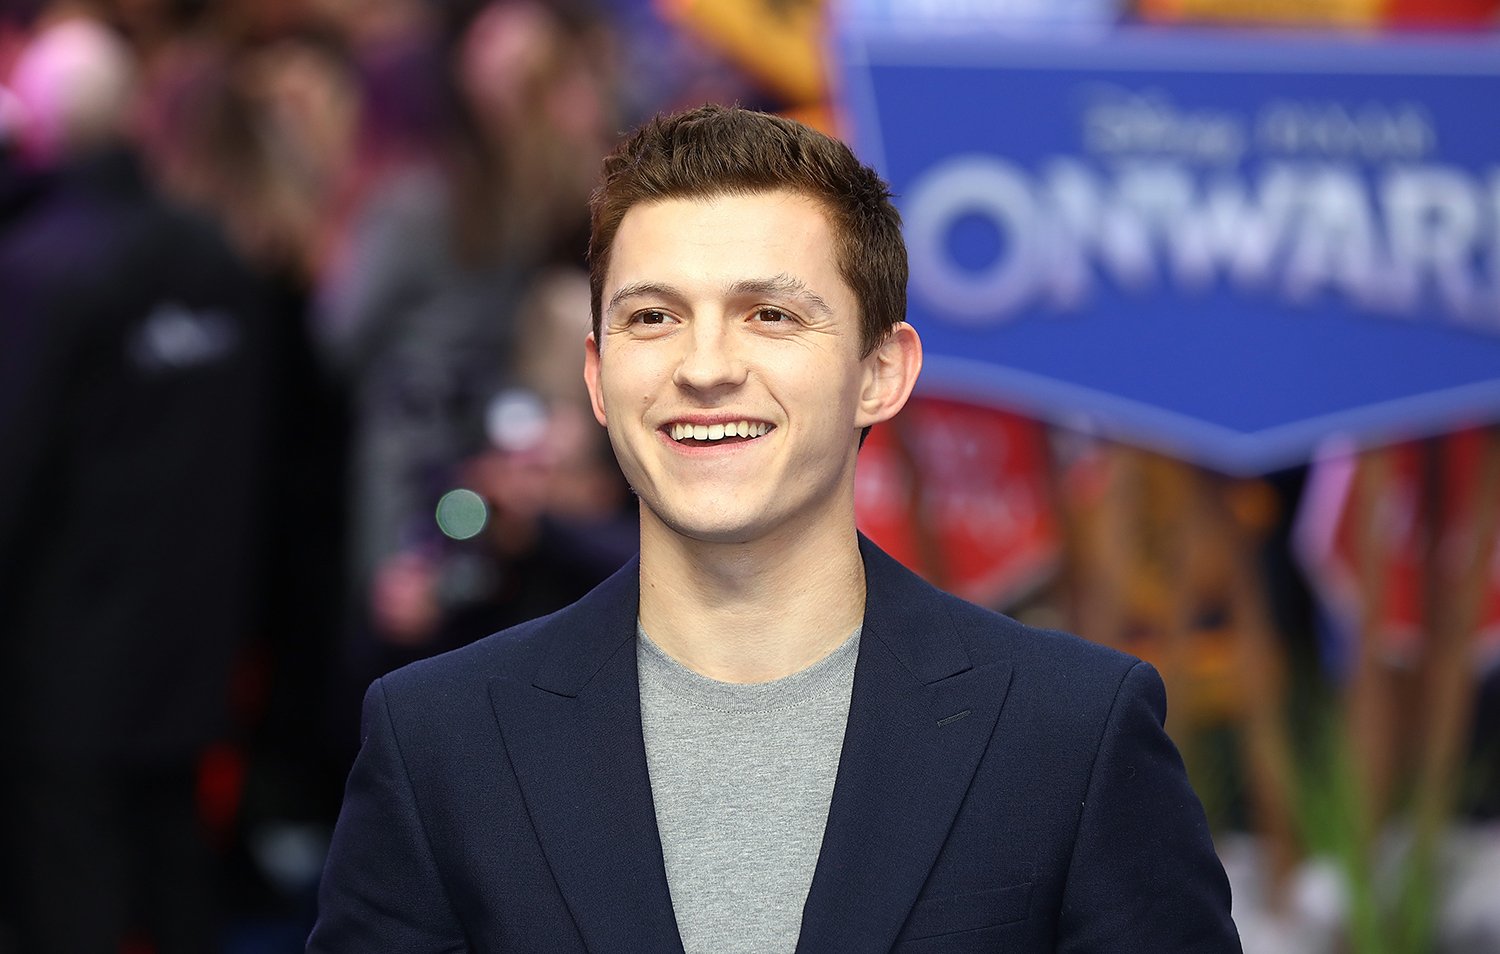 Tom Holland at the 'Onward' premiere in London